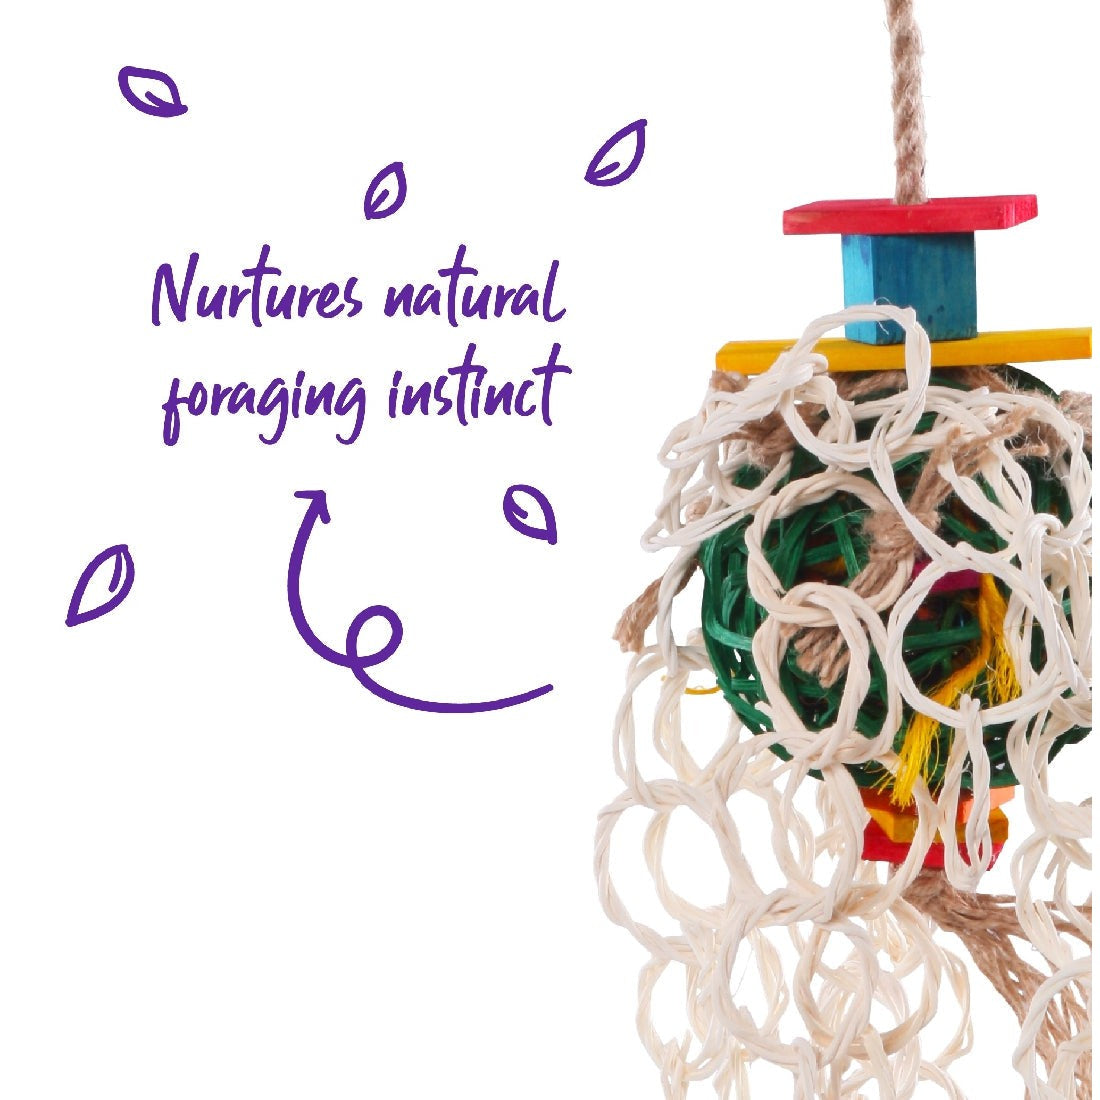 Colorful bird toy with text "Nurtures natural foraging instinct" on white background.